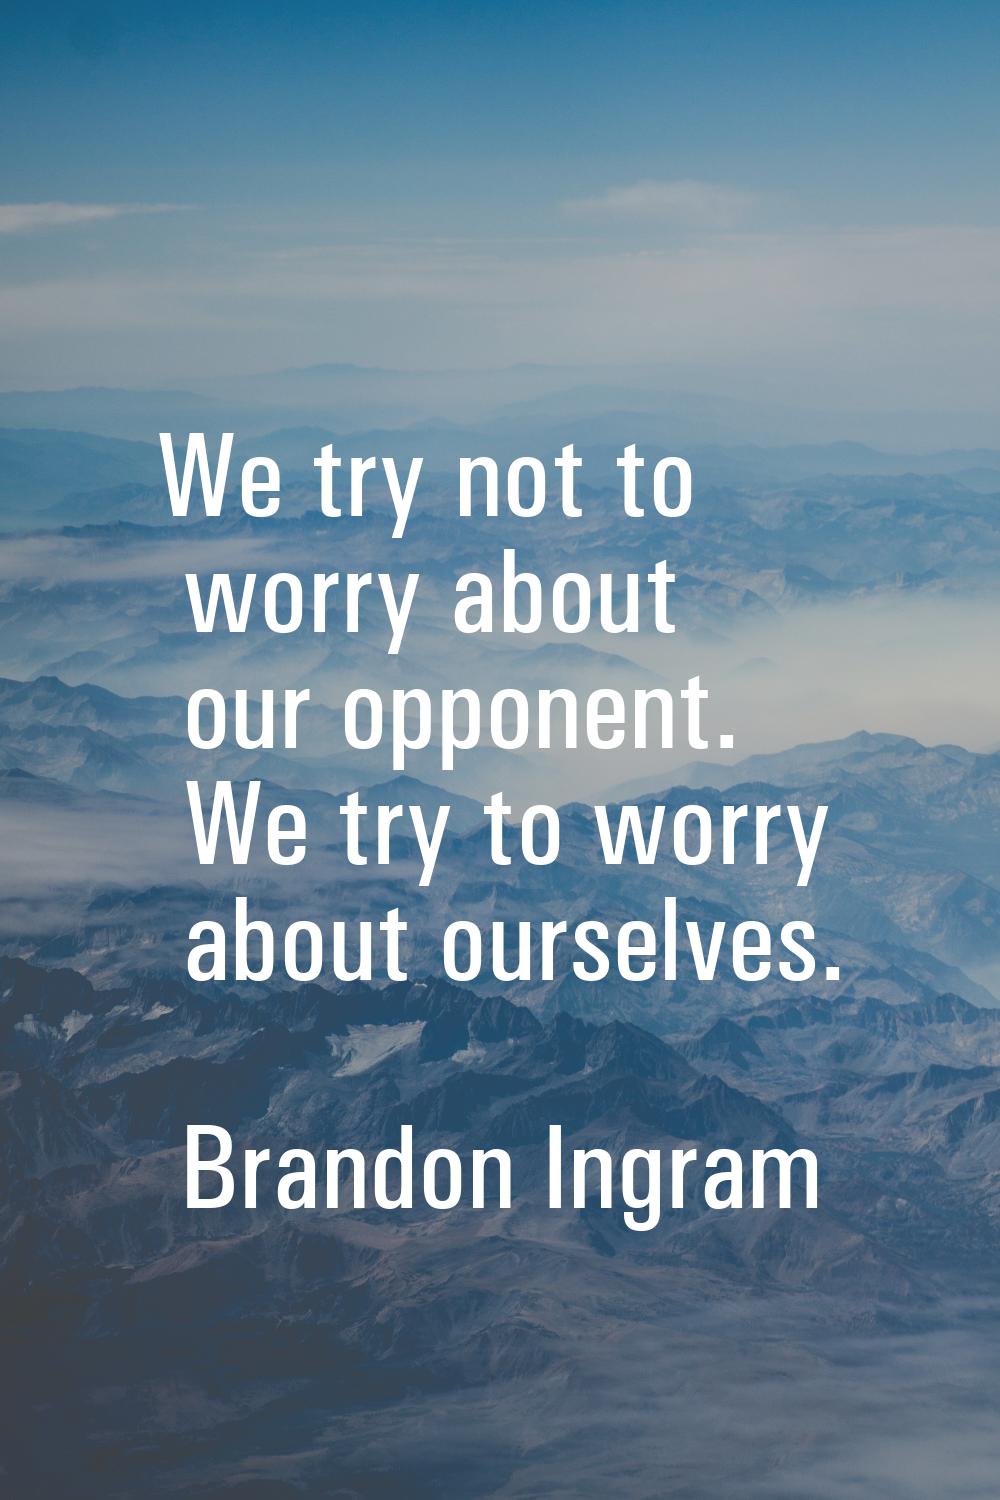 We try not to worry about our opponent. We try to worry about ourselves.